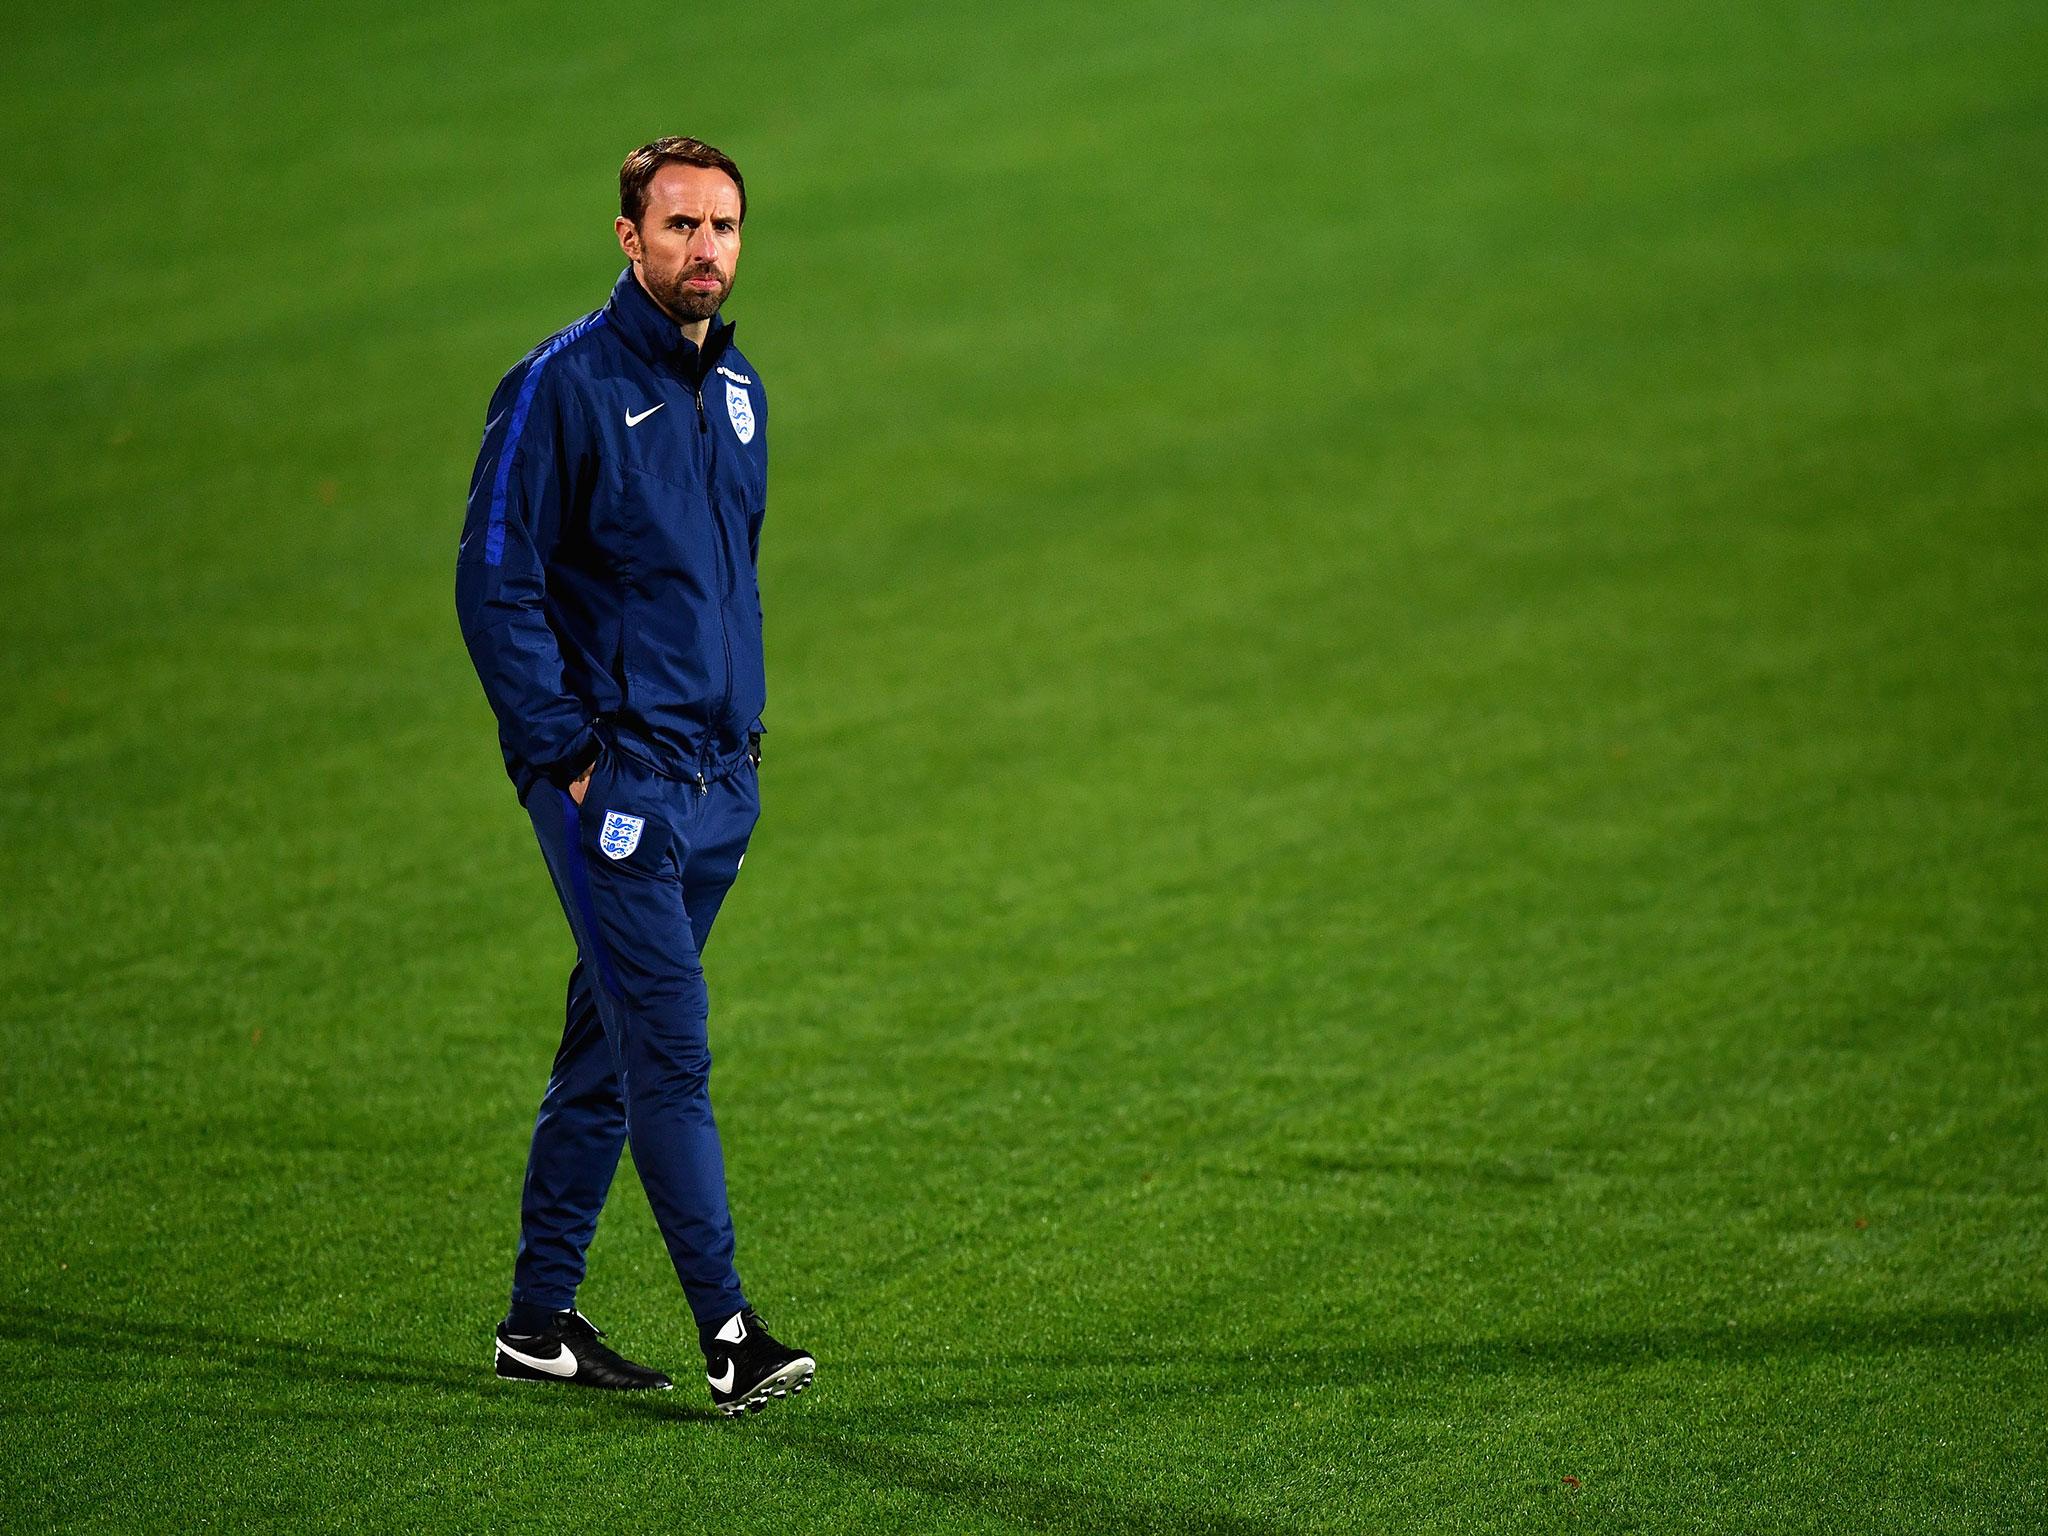 Gareth Southgate is now focusing on performances after securing qualification